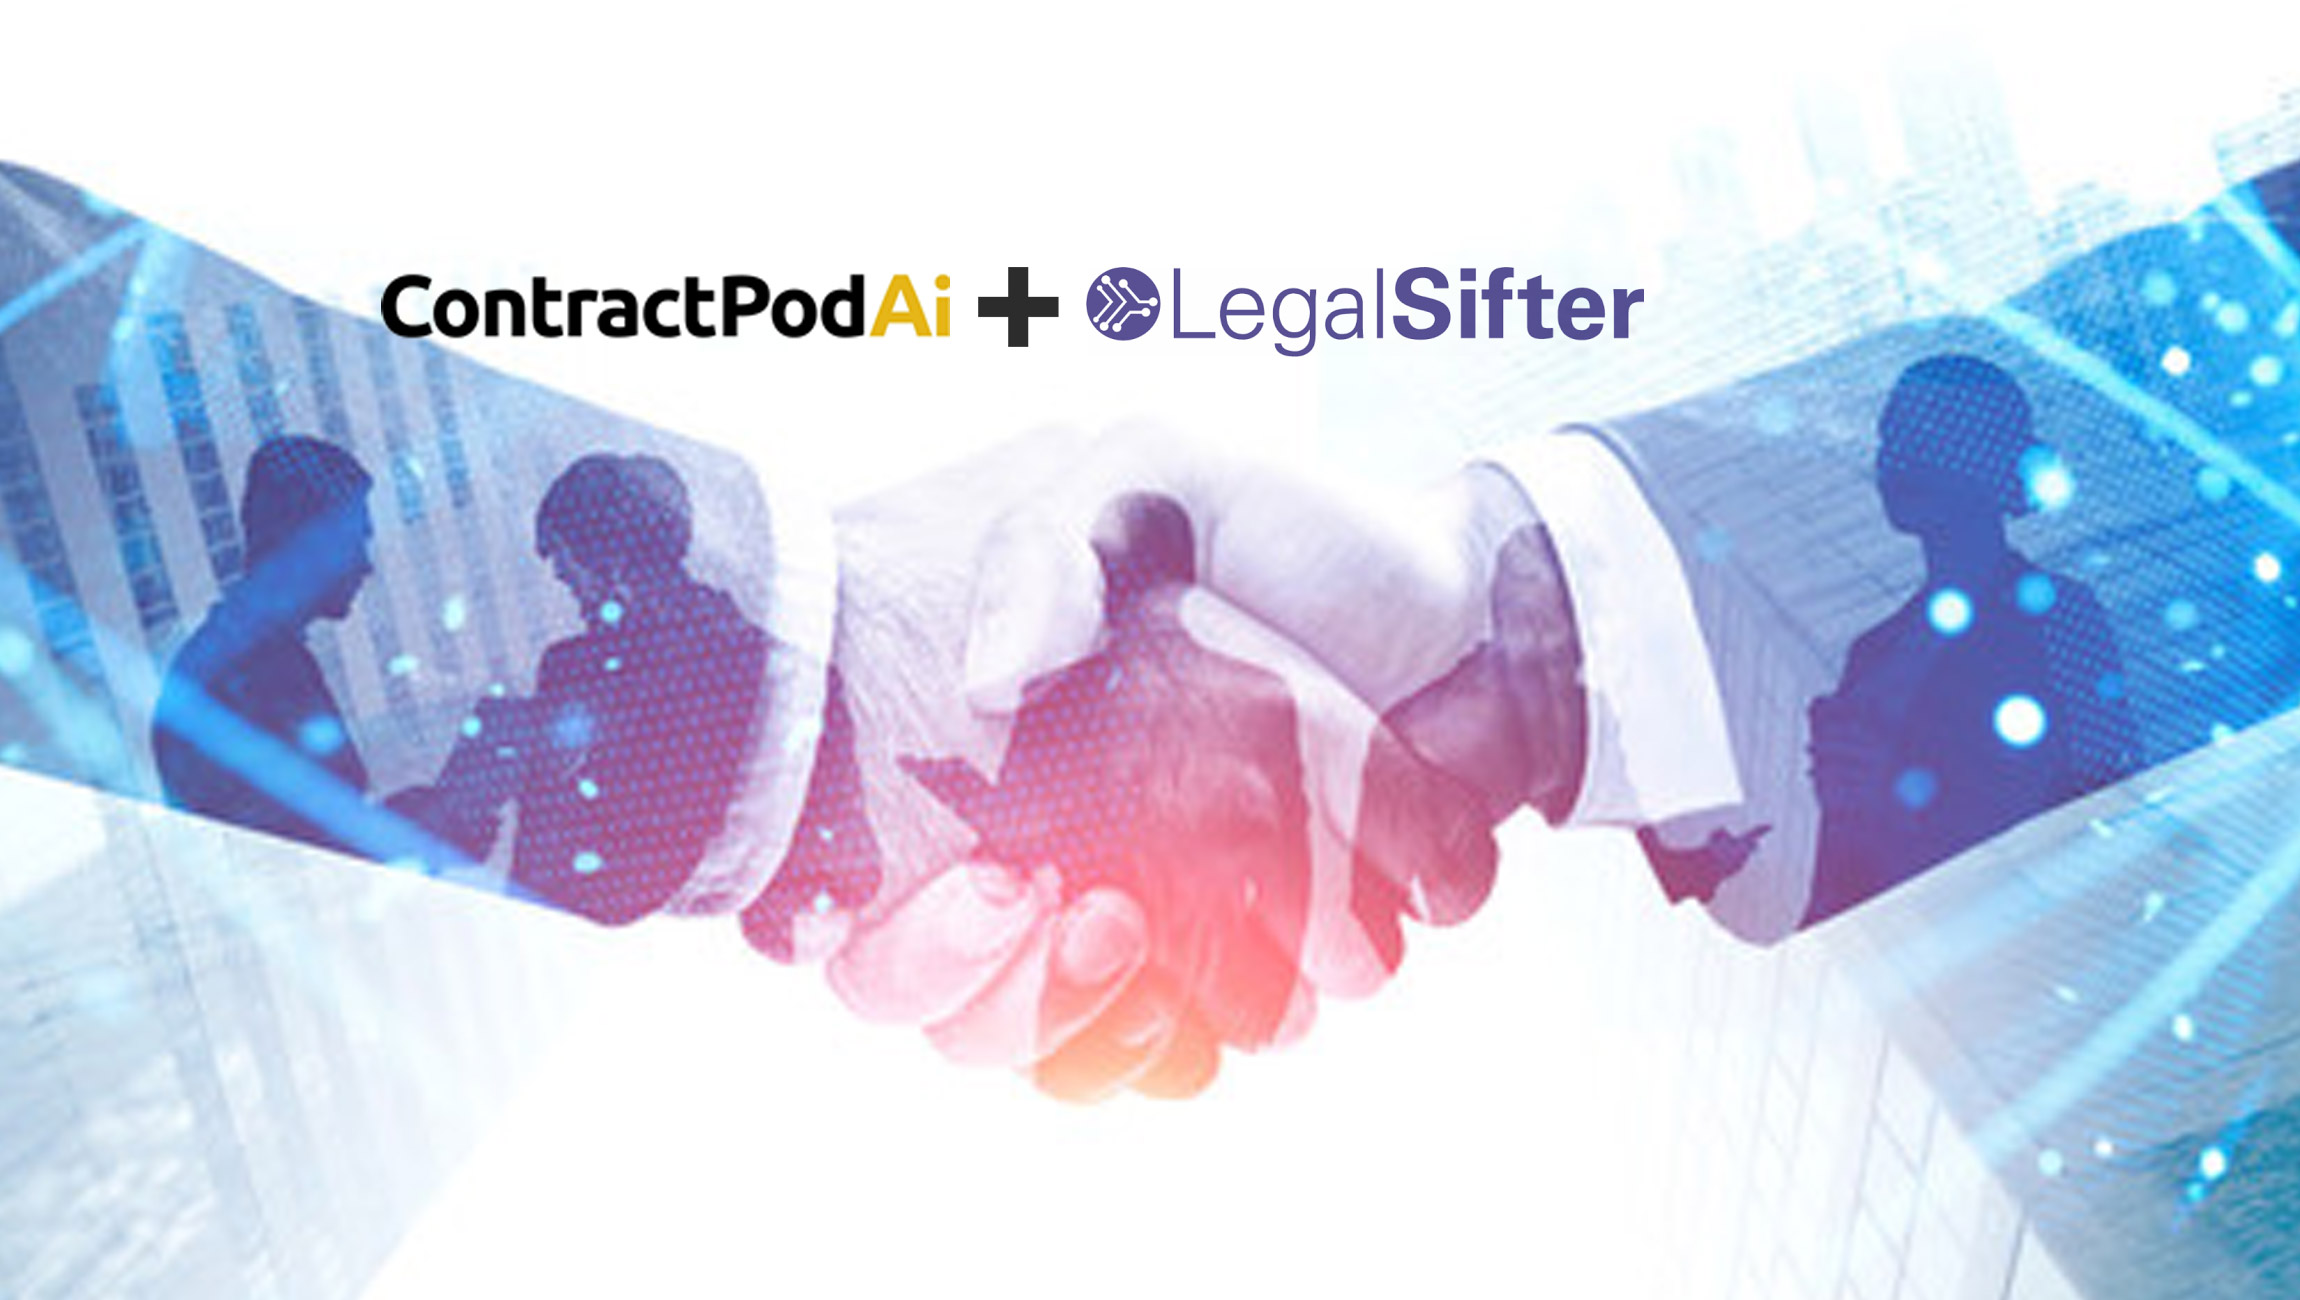 ContractPodAi and LegalSifter Partner to Offer Complete AI Contract Review and Contract Lifecycle Management Solution